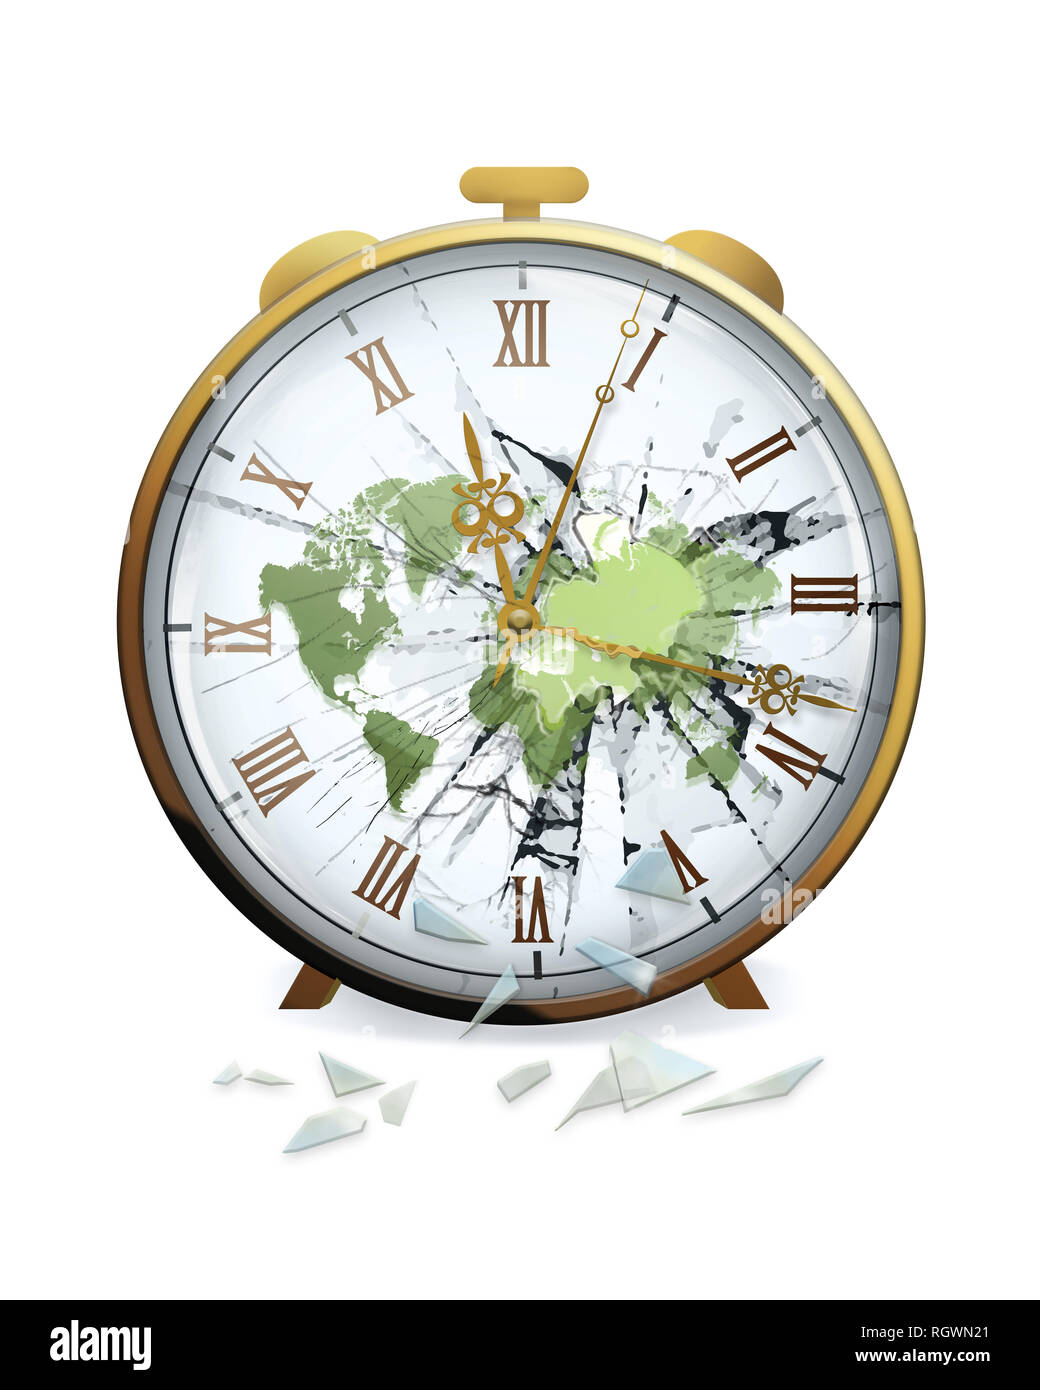 Closeup of clock face with broken glass. Time is running out. Stock Photo